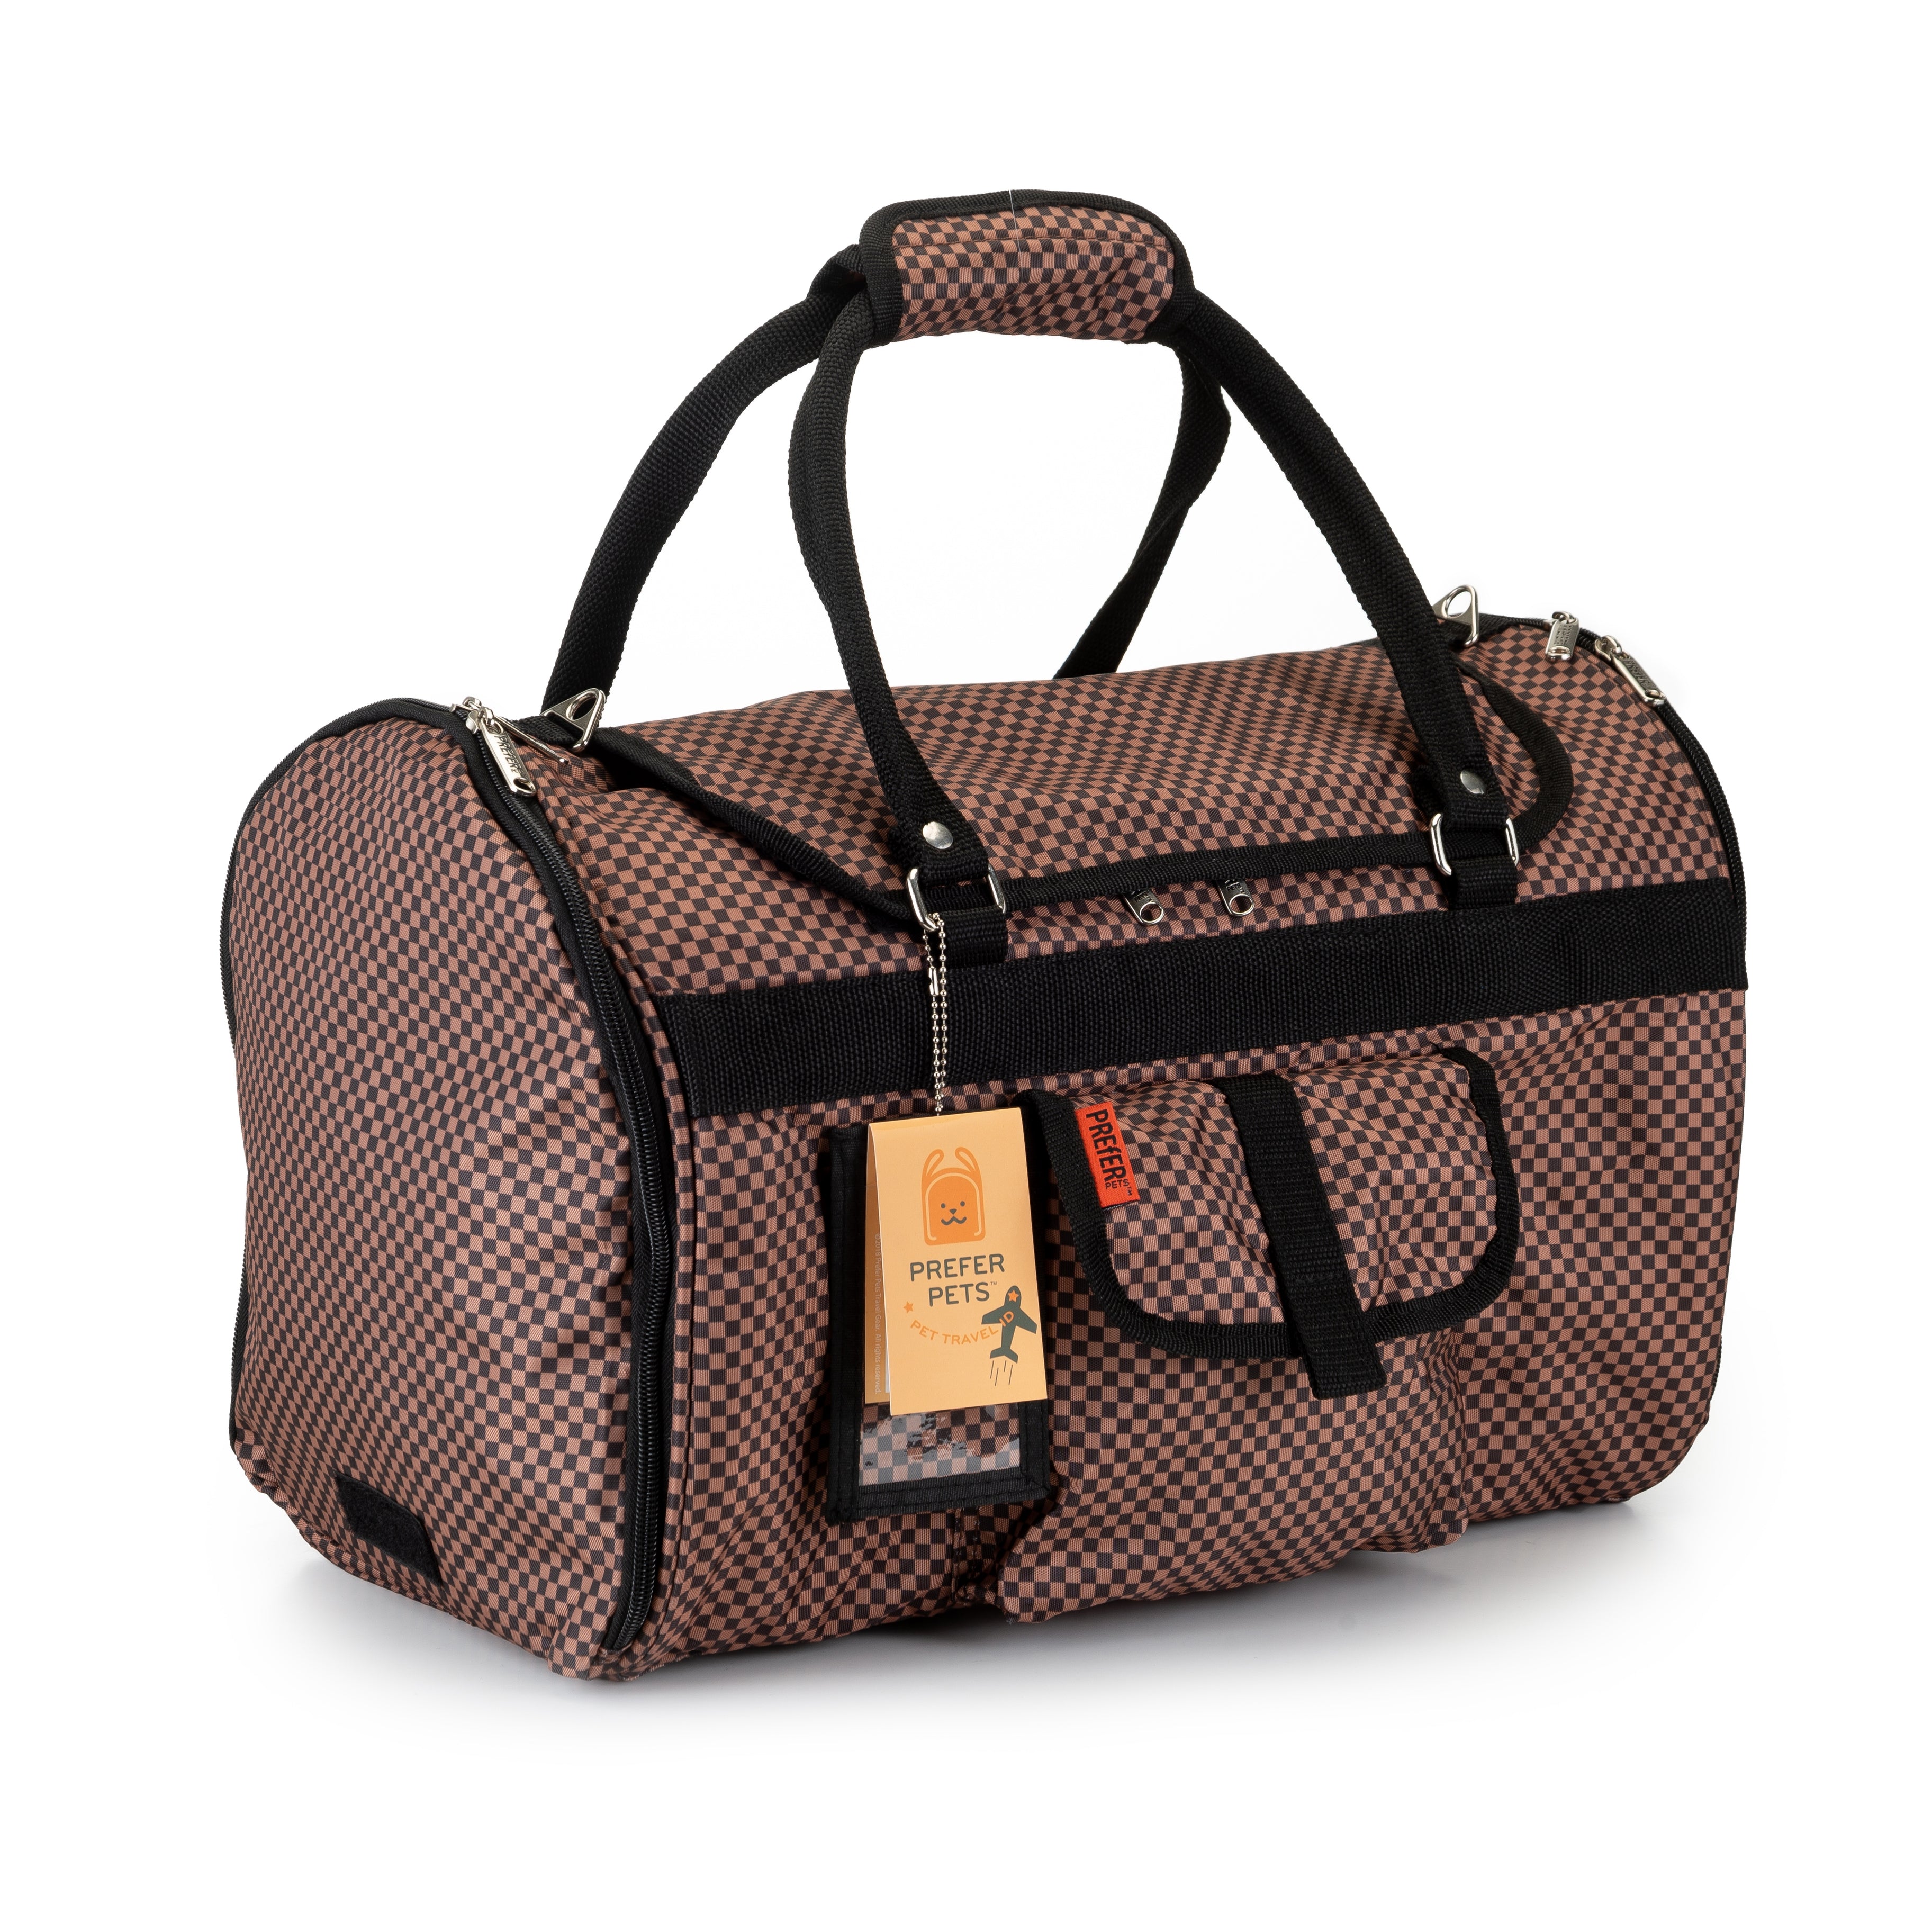 Designer Dog Carriers - Brown Checkered Hideaway Duffel Dog Carrier by Prefer Pets